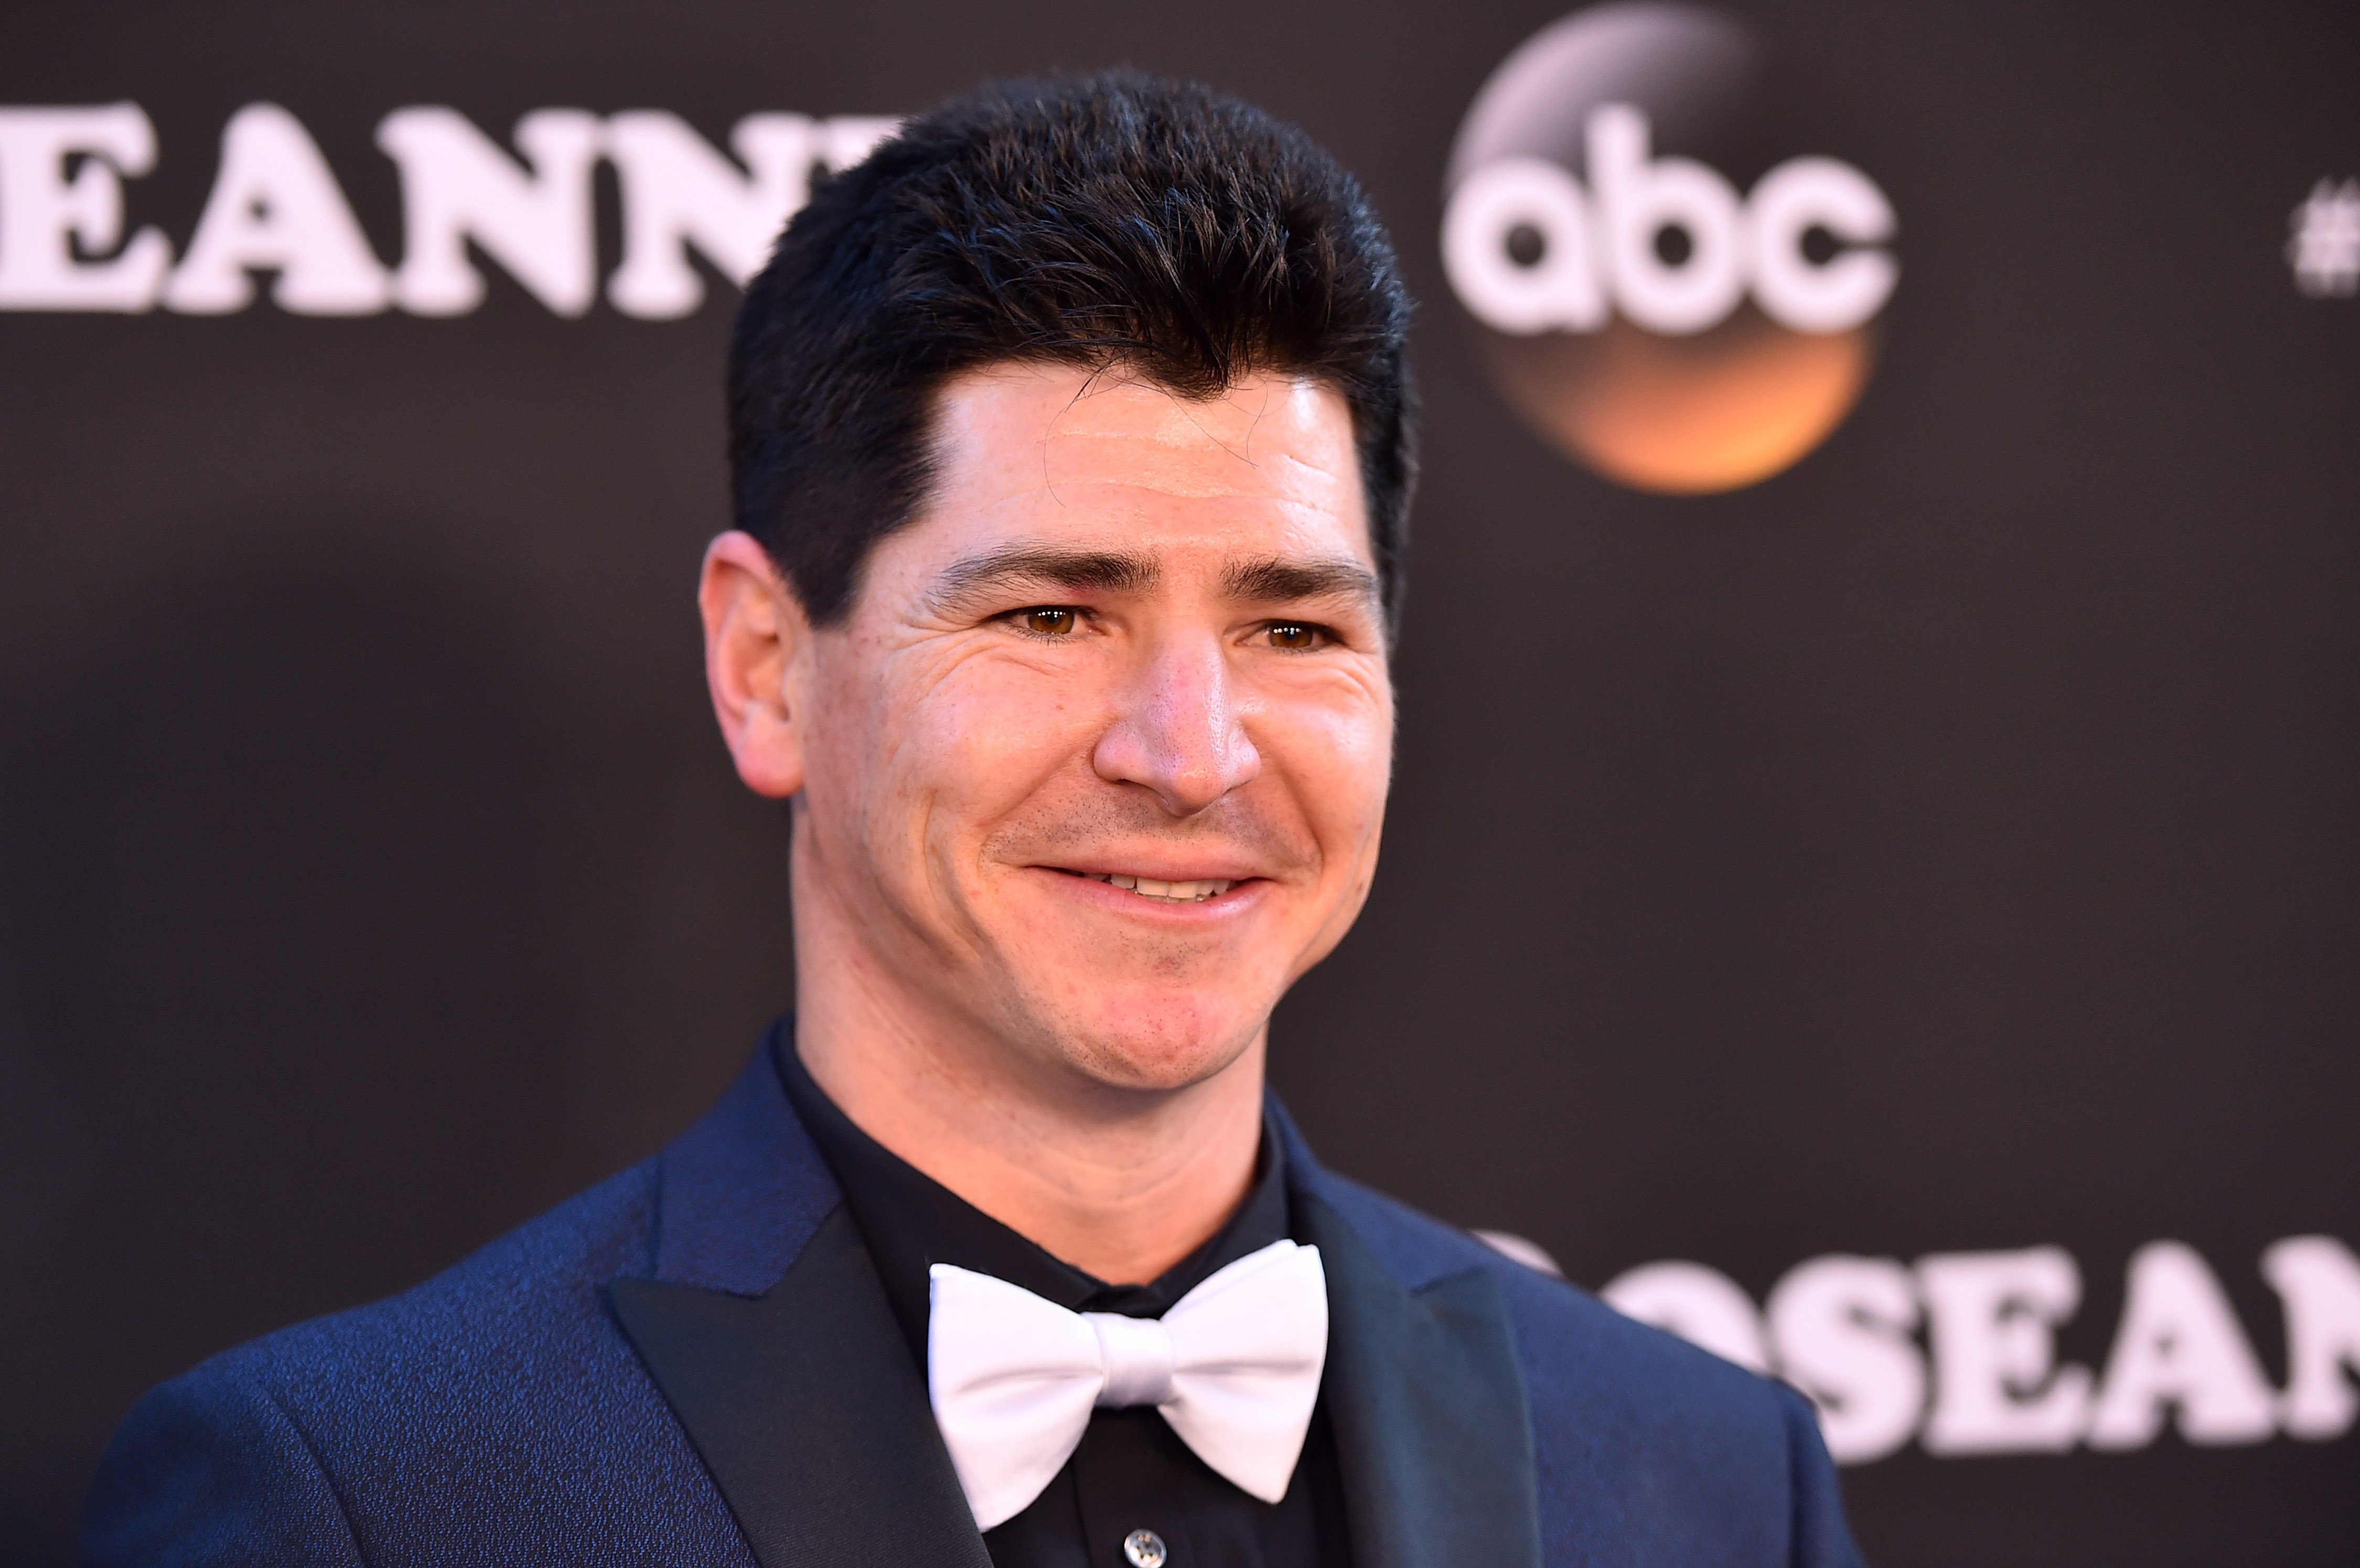 Michael Fishman at the premiere of ABC's "Roseanne"  on March 23, 2018, in Burbank, California. | Source: Getty Images